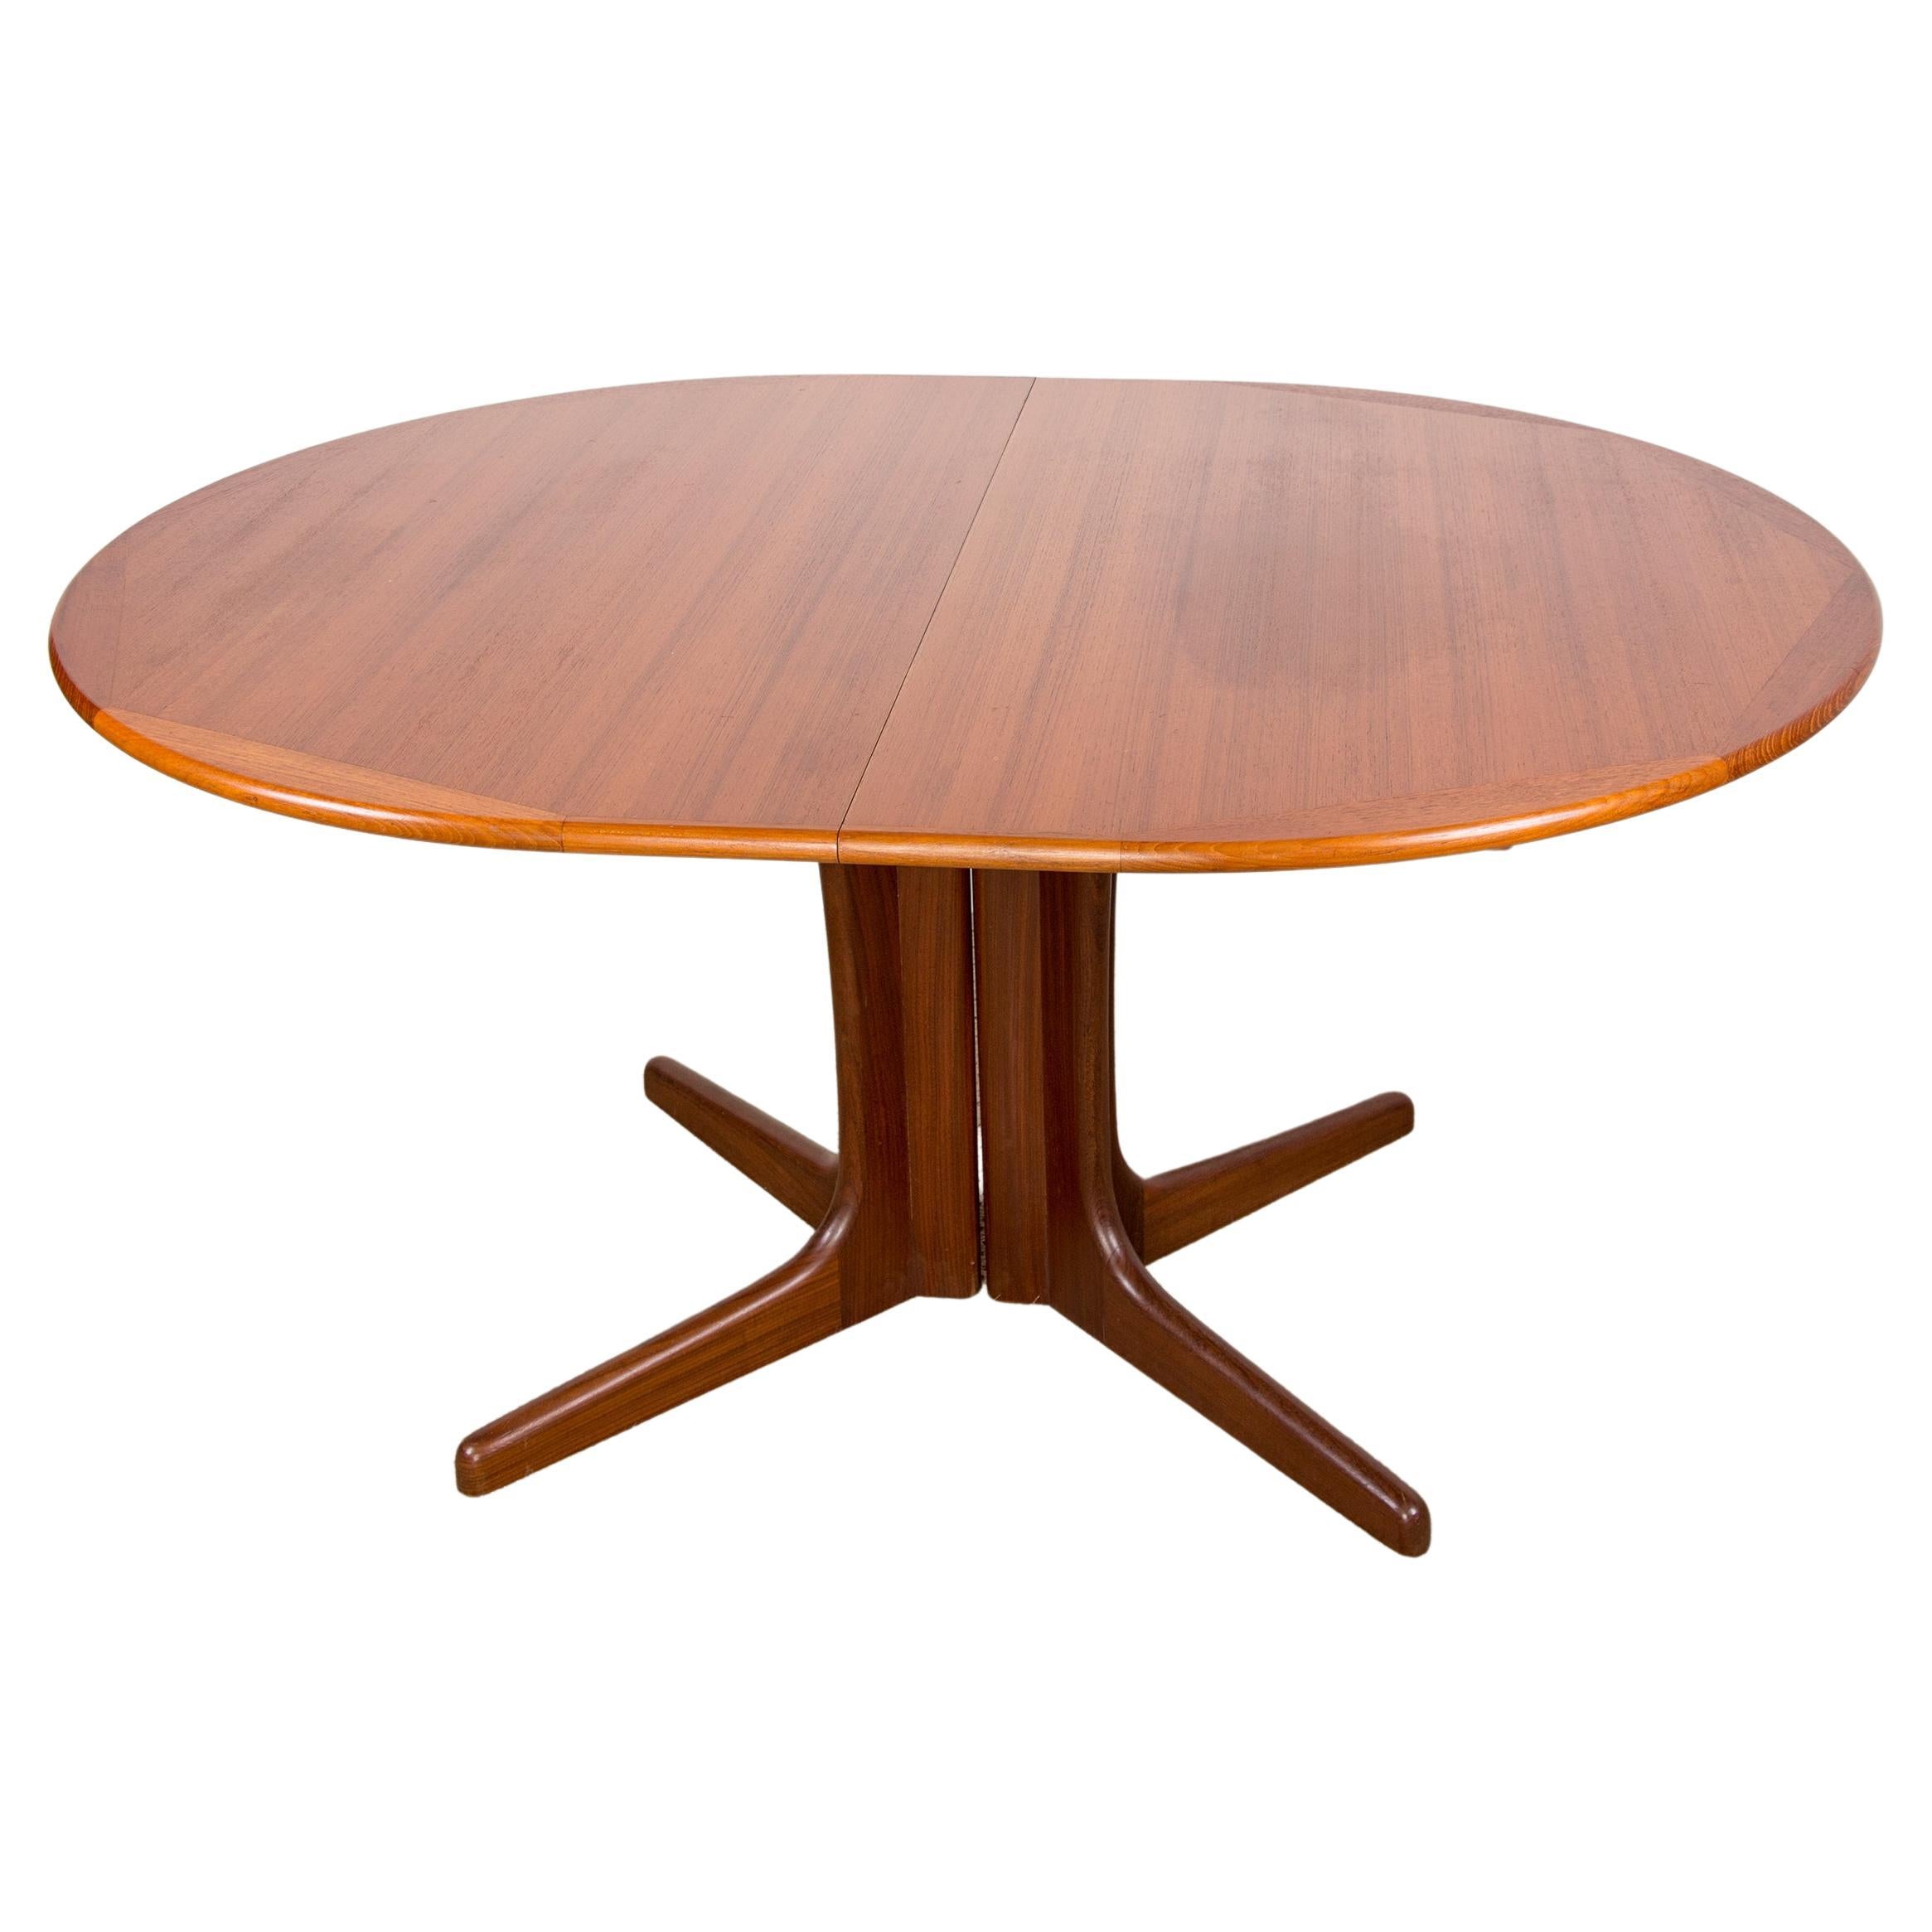 Large Scandinavian Oval Extendable Teak Dining Table with Central Foot, 1960